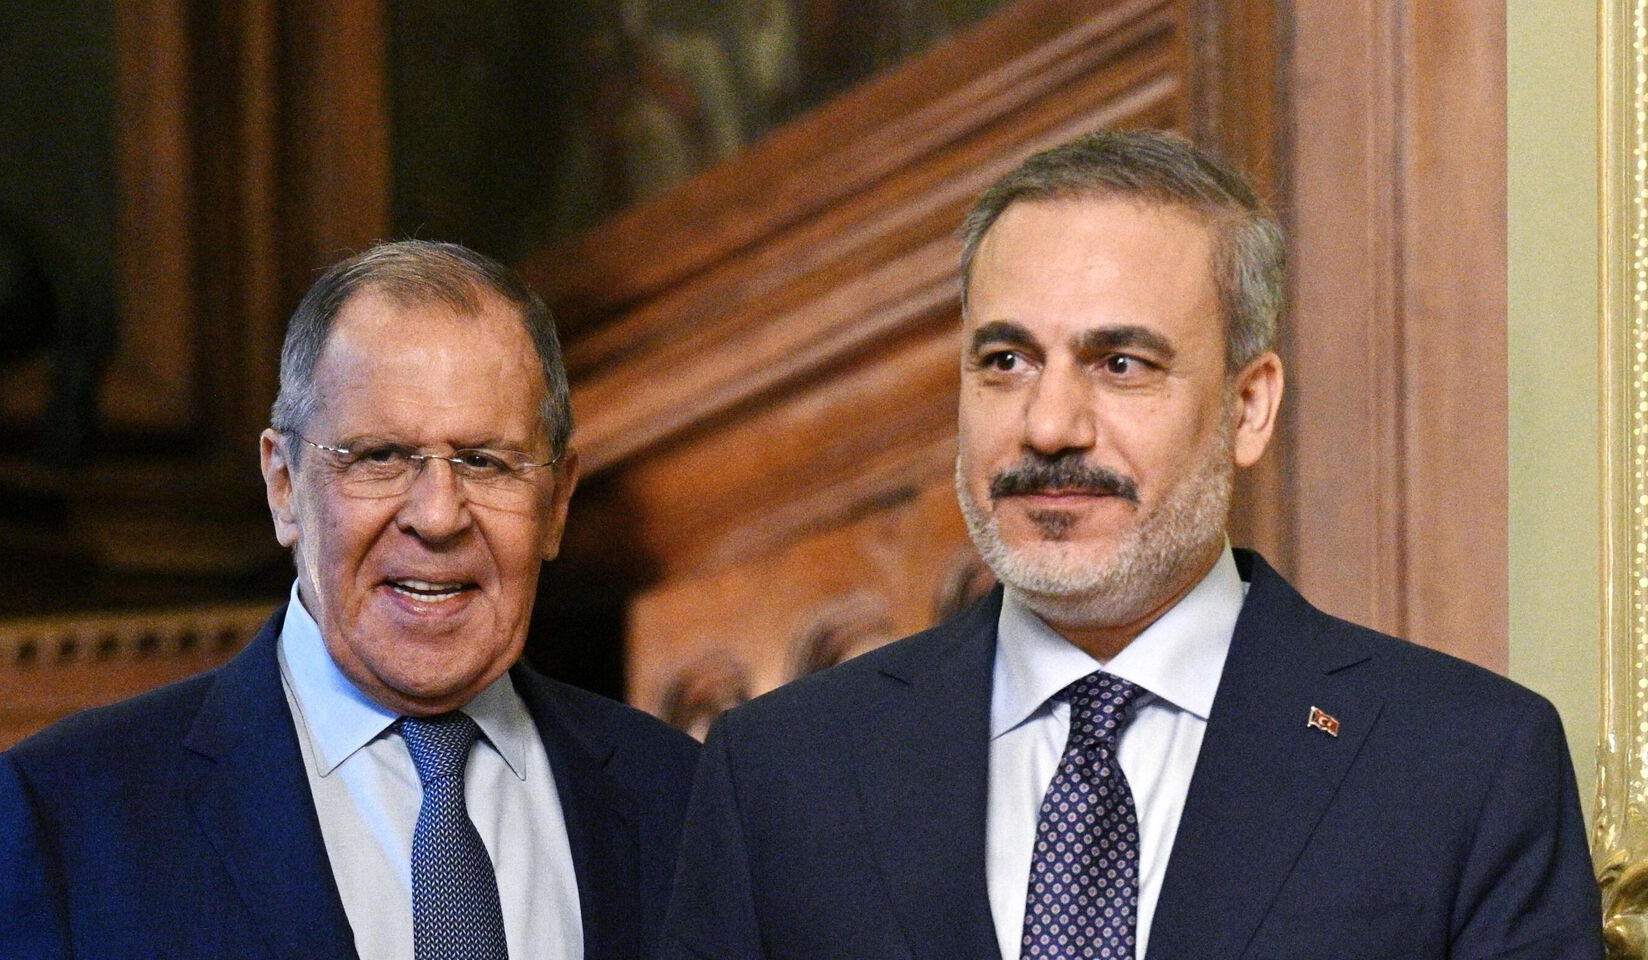 Russia is interested in normalization of relations between Turkey and Armenia: Lavrov